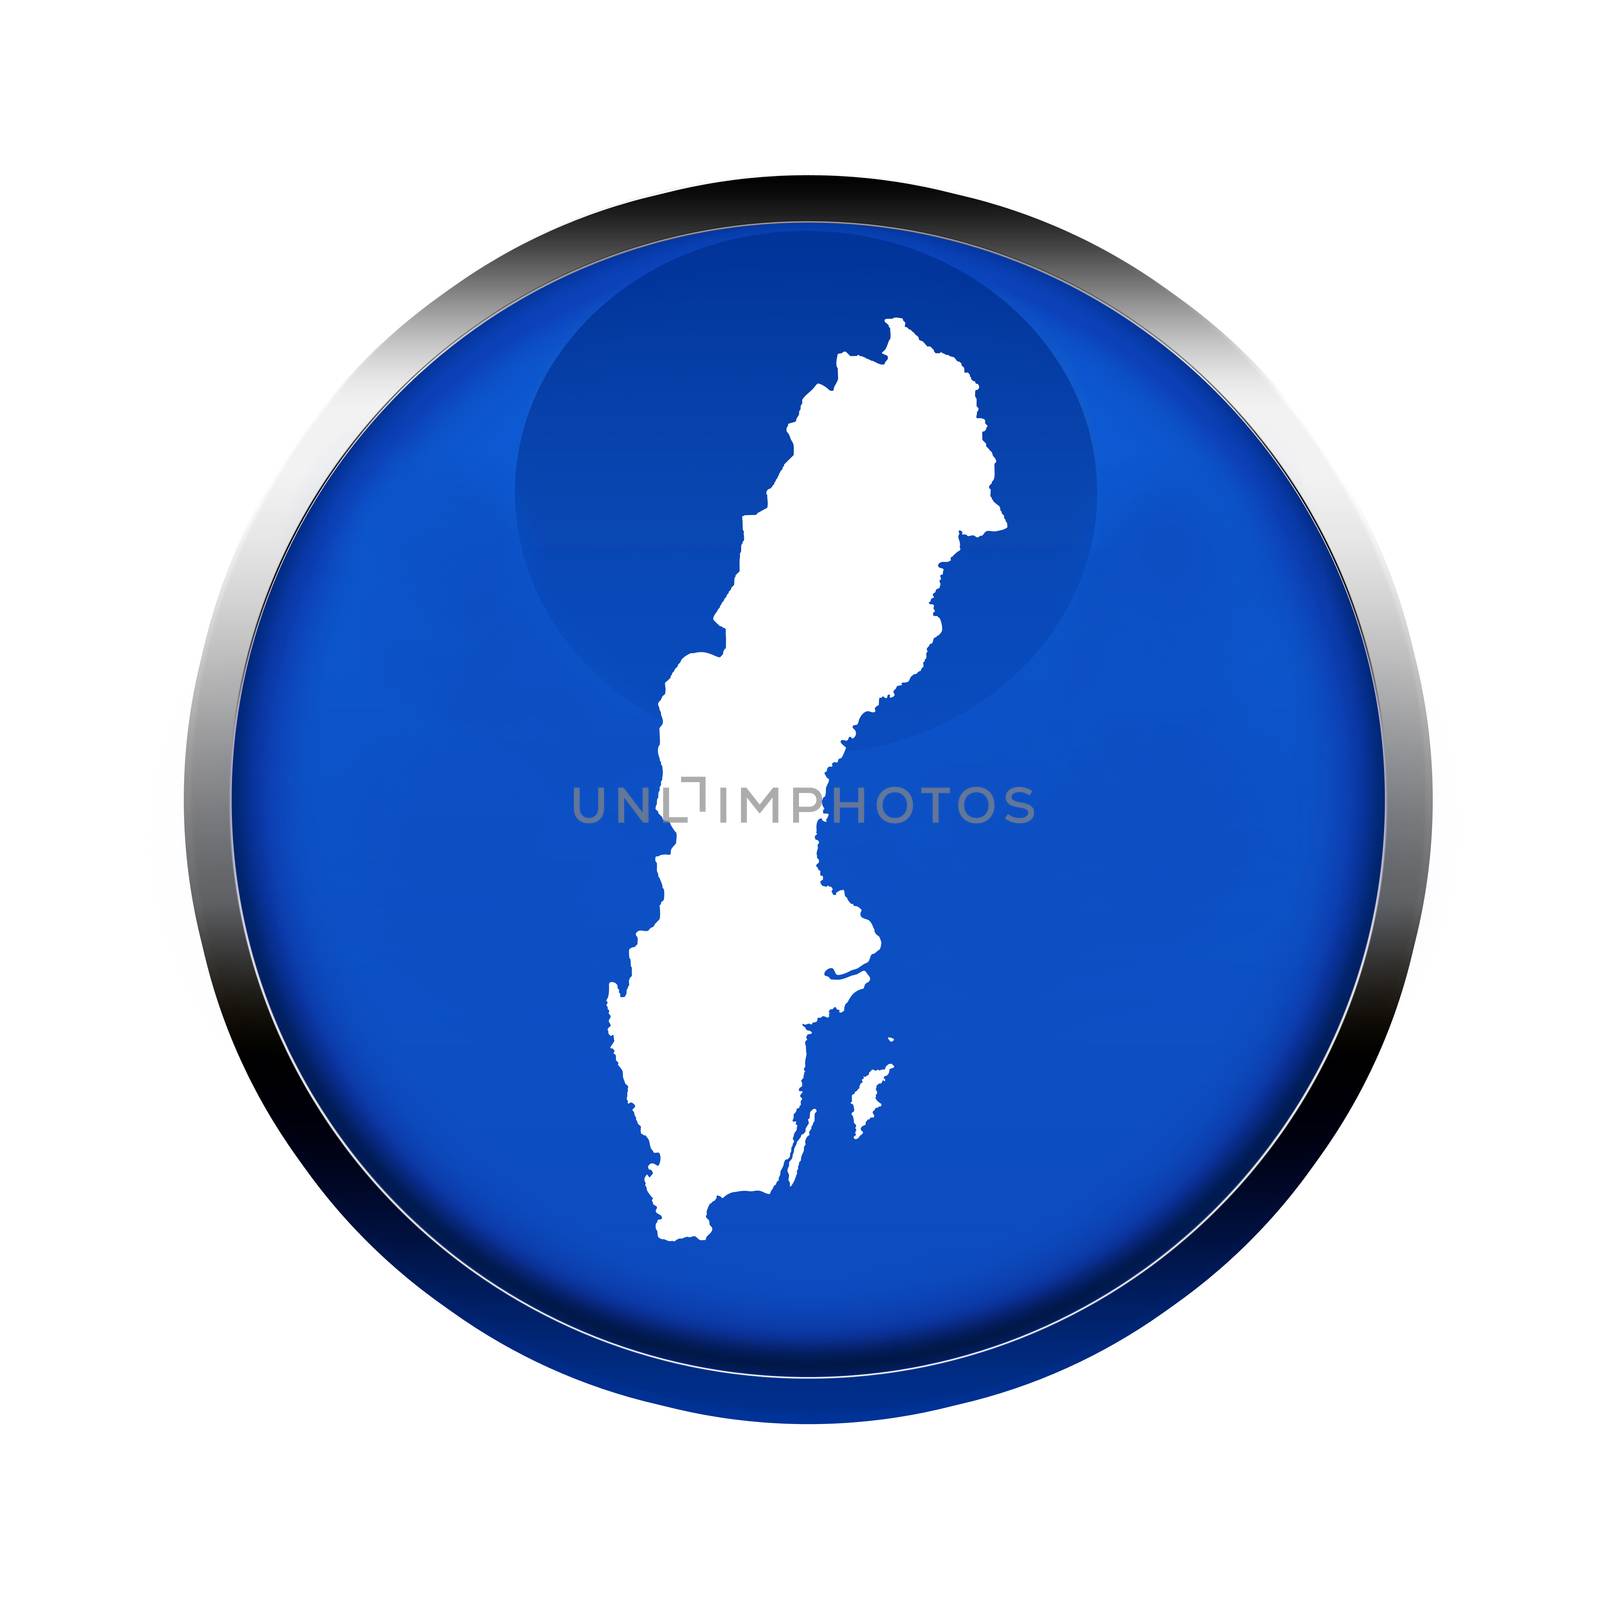 Sweden map button in the colors of the European Union.